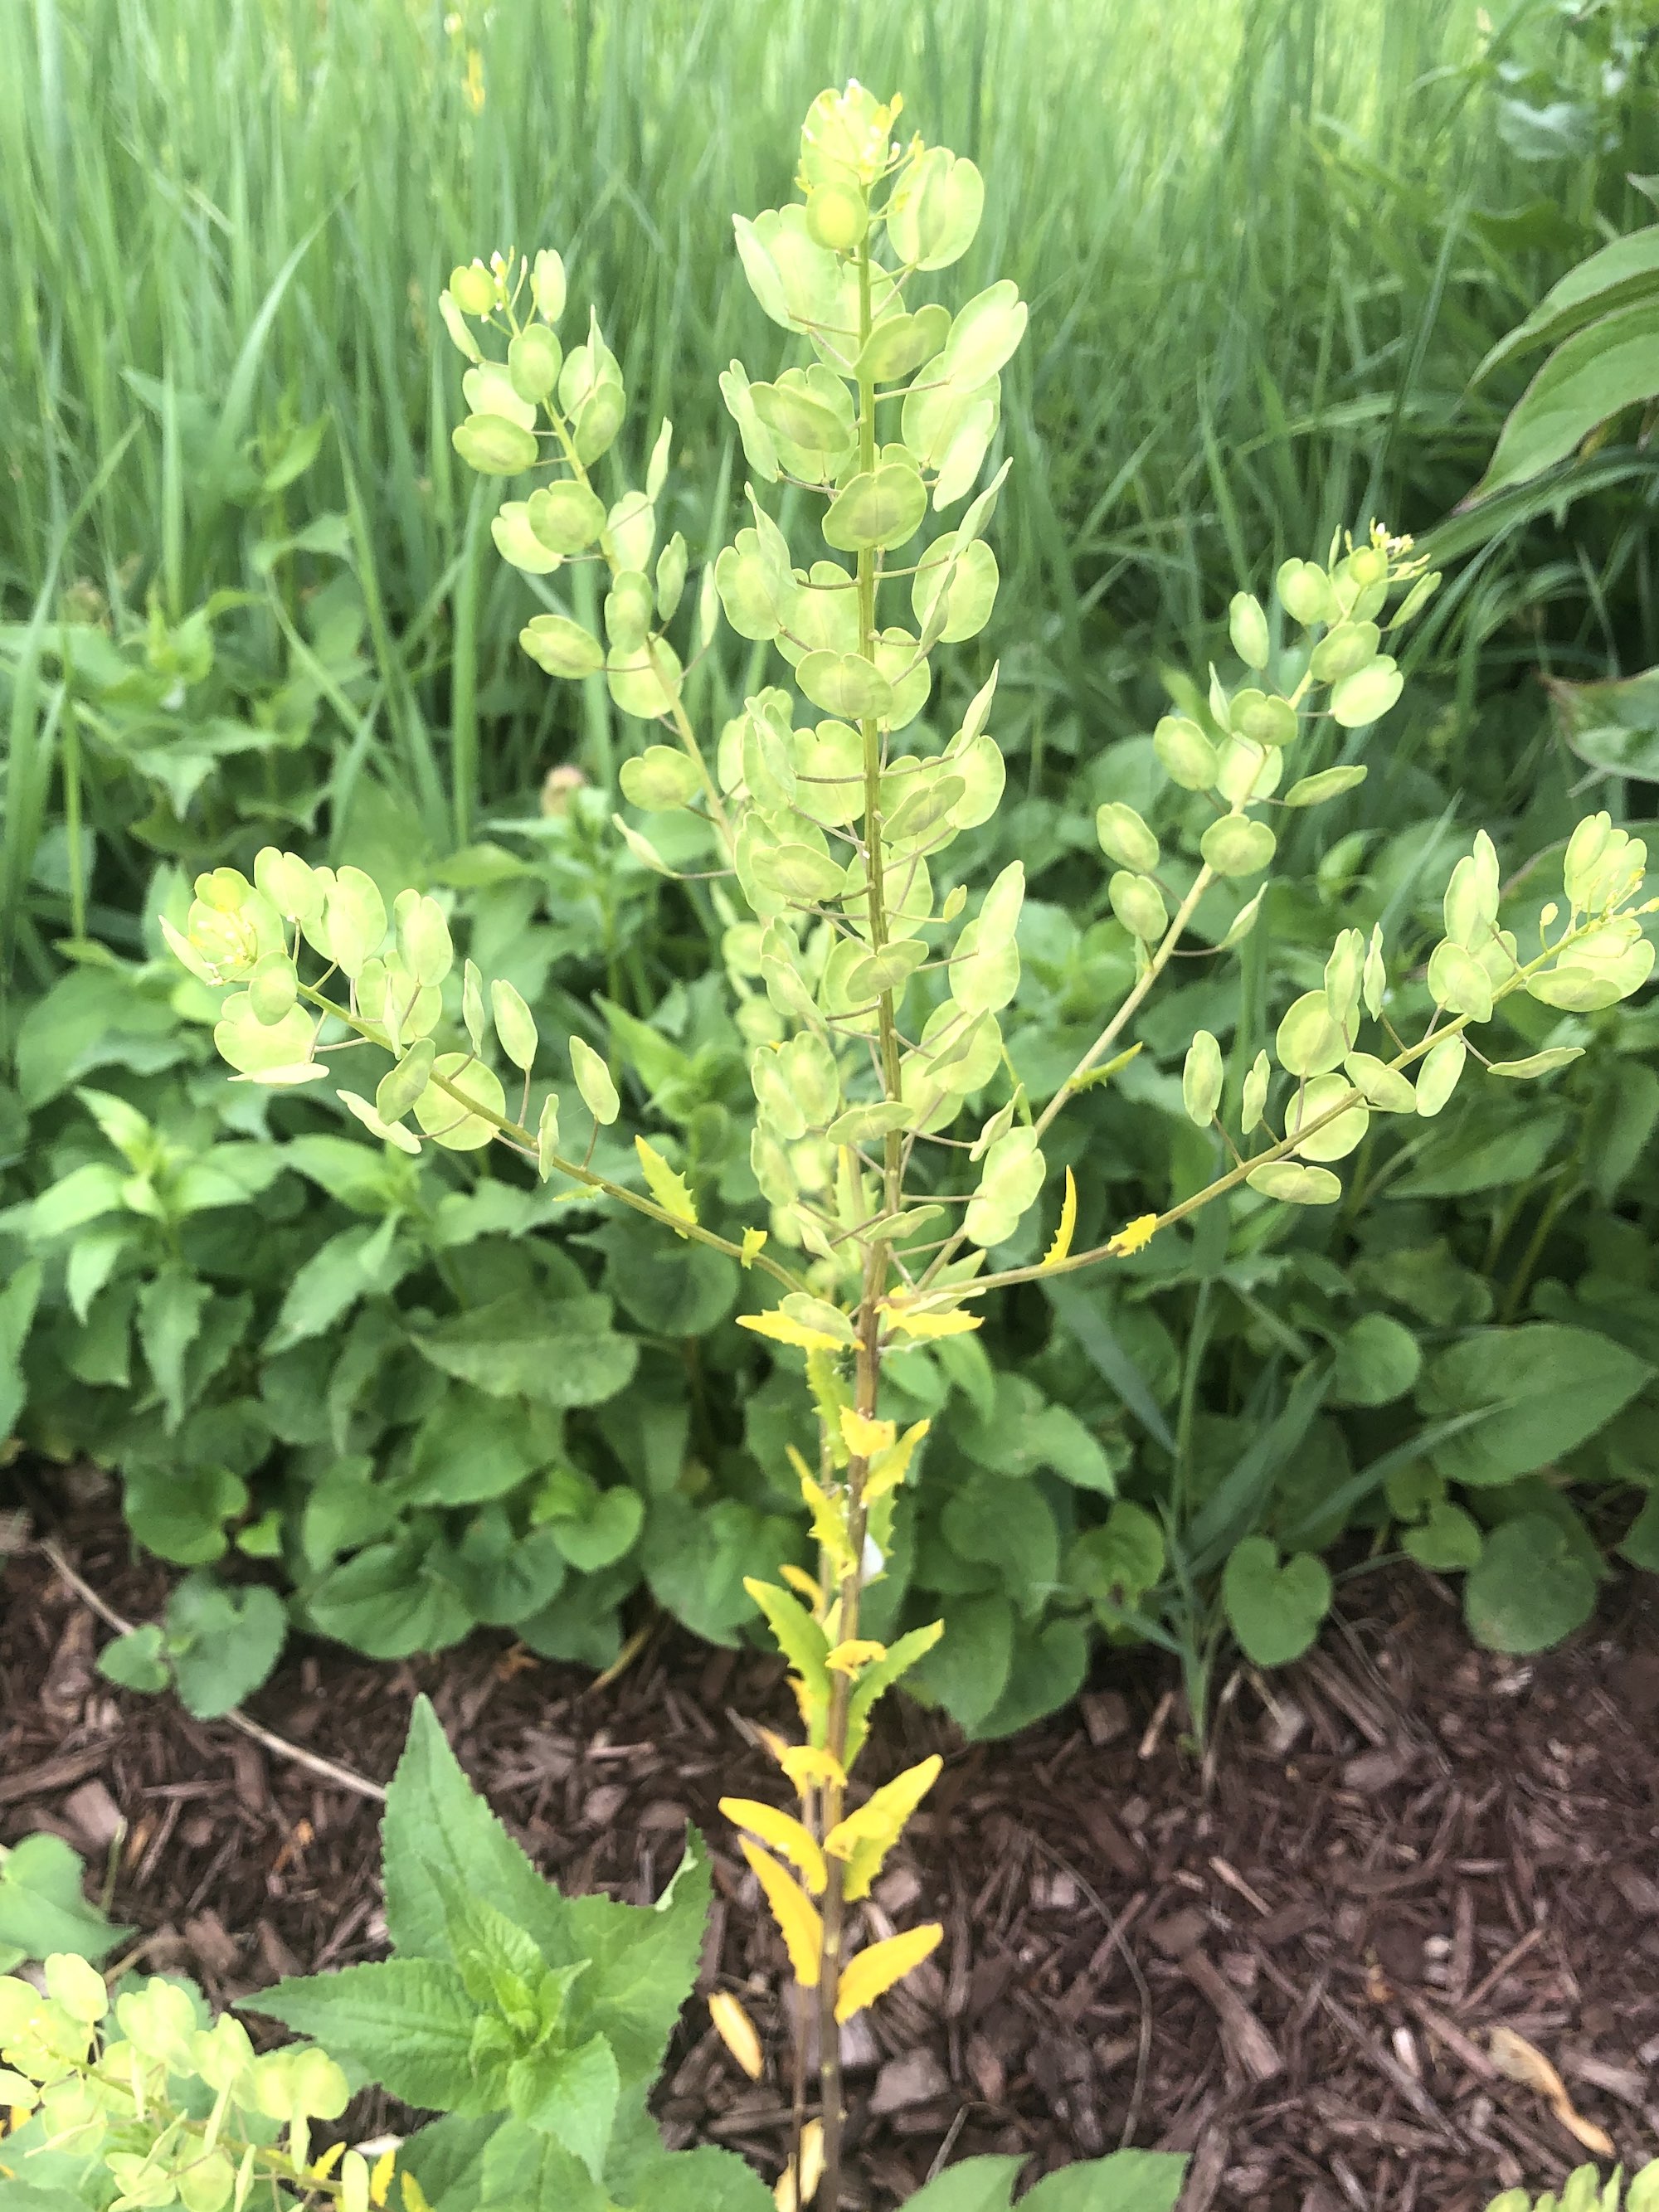 Field Pennycress leaves near retaining pond on corner of Manitou Way and Nakoma Road in Madison, Wisconsin on May 21, 2021.